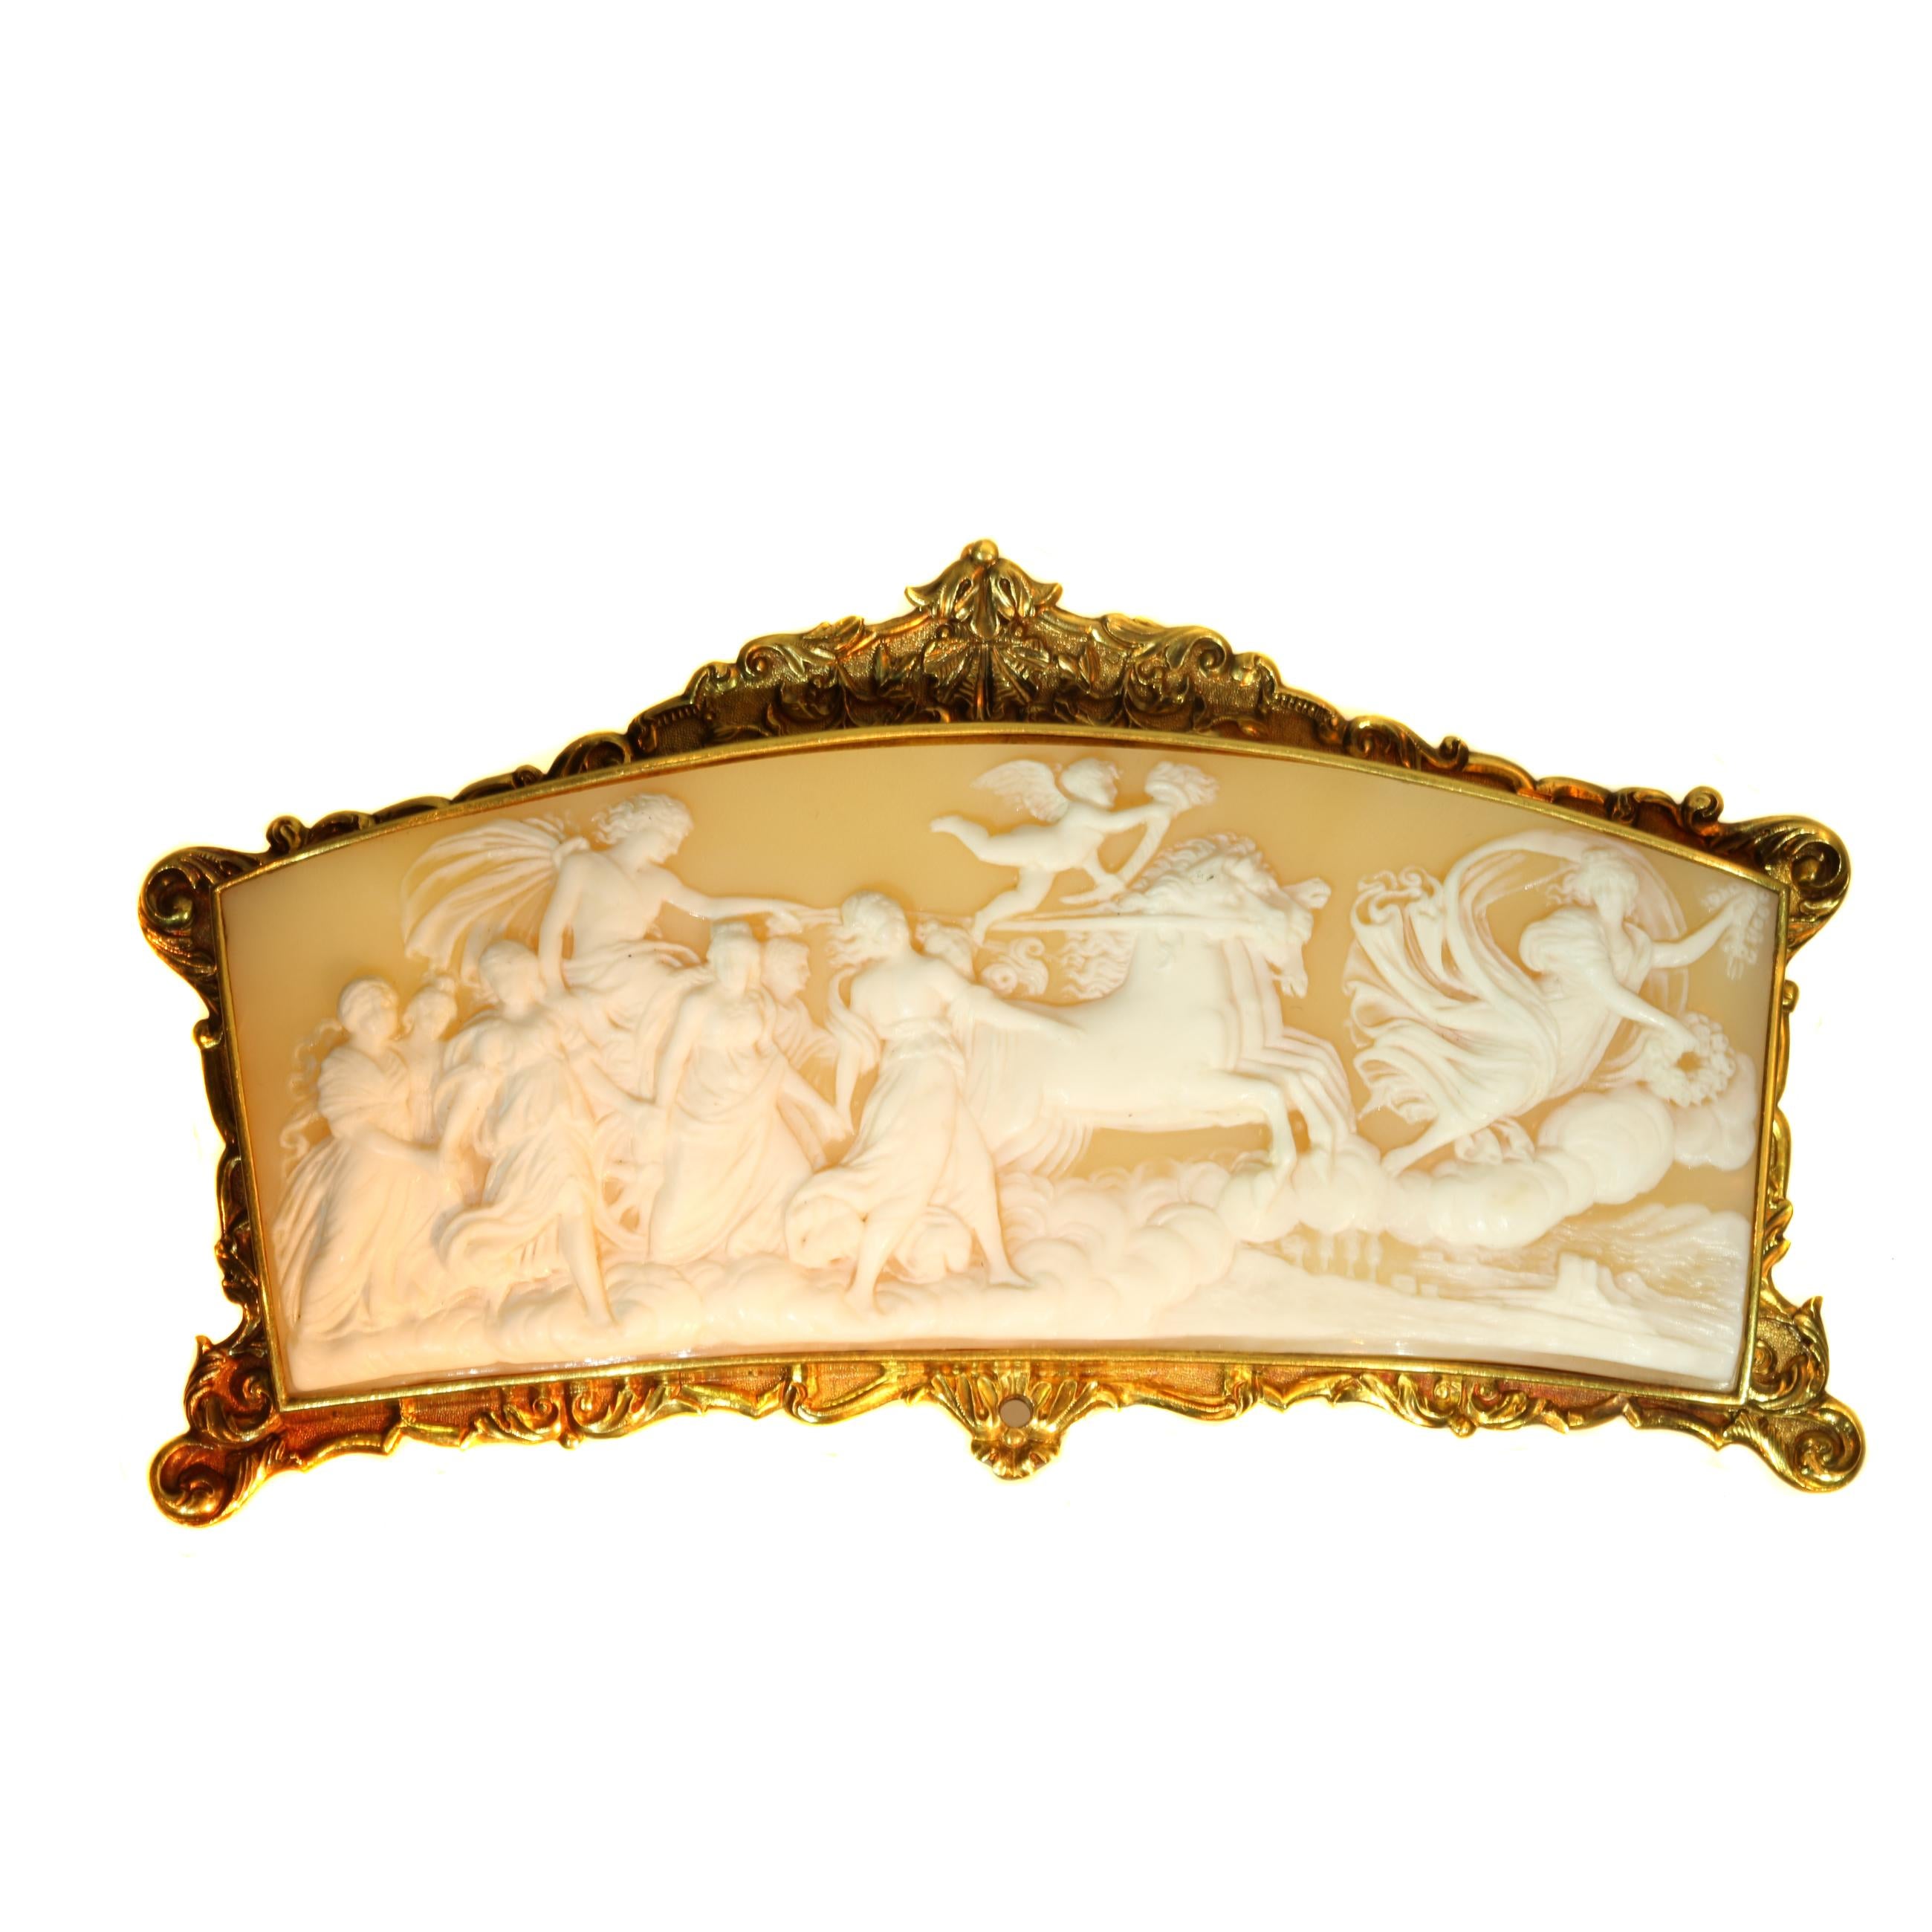  Superb Baroque Style French Cameo with Gold Mounting